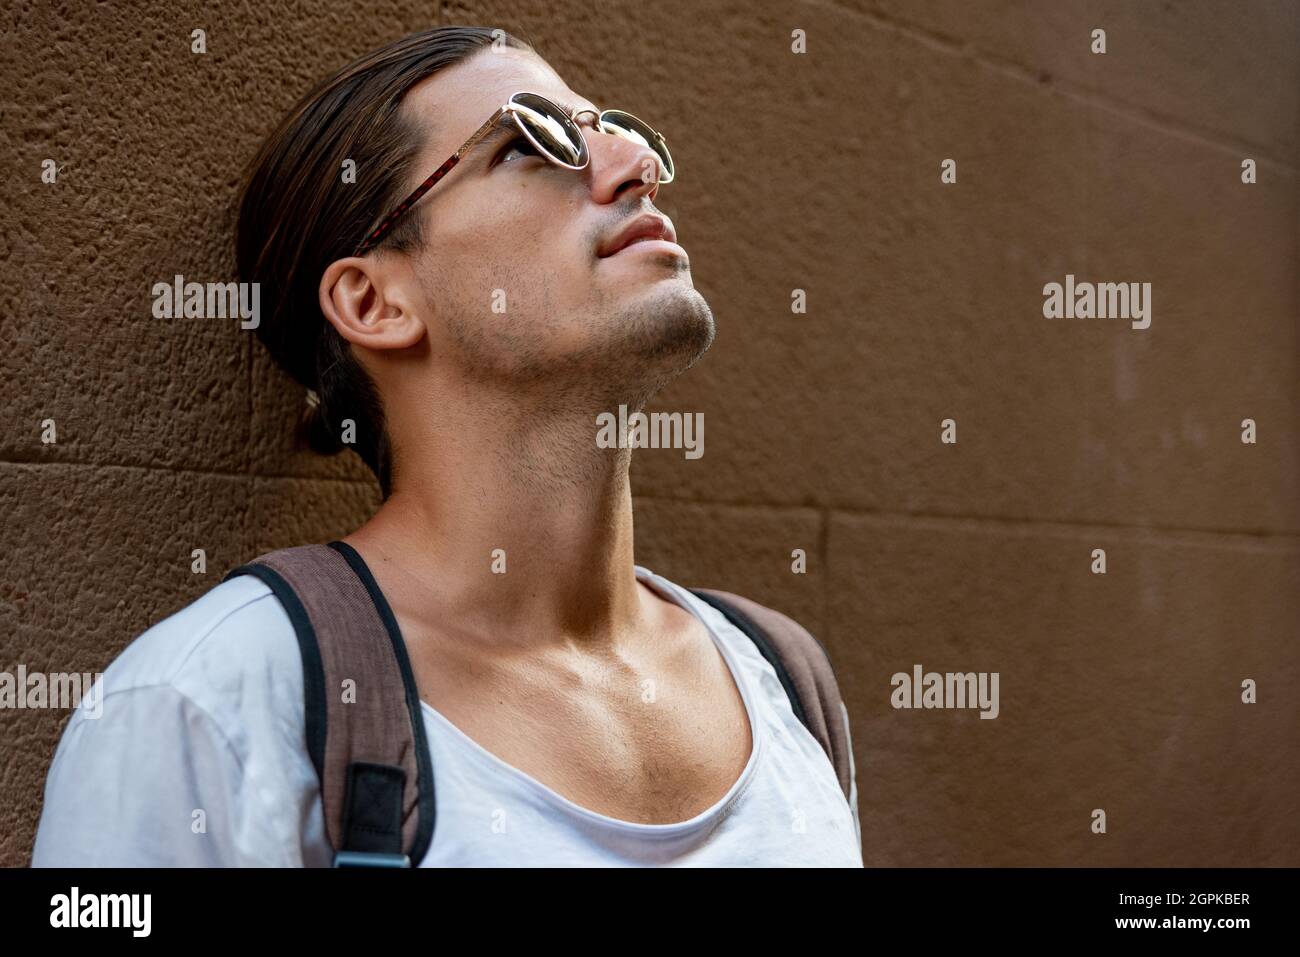 Portrait of young latin man with sun glasses Stock Photo